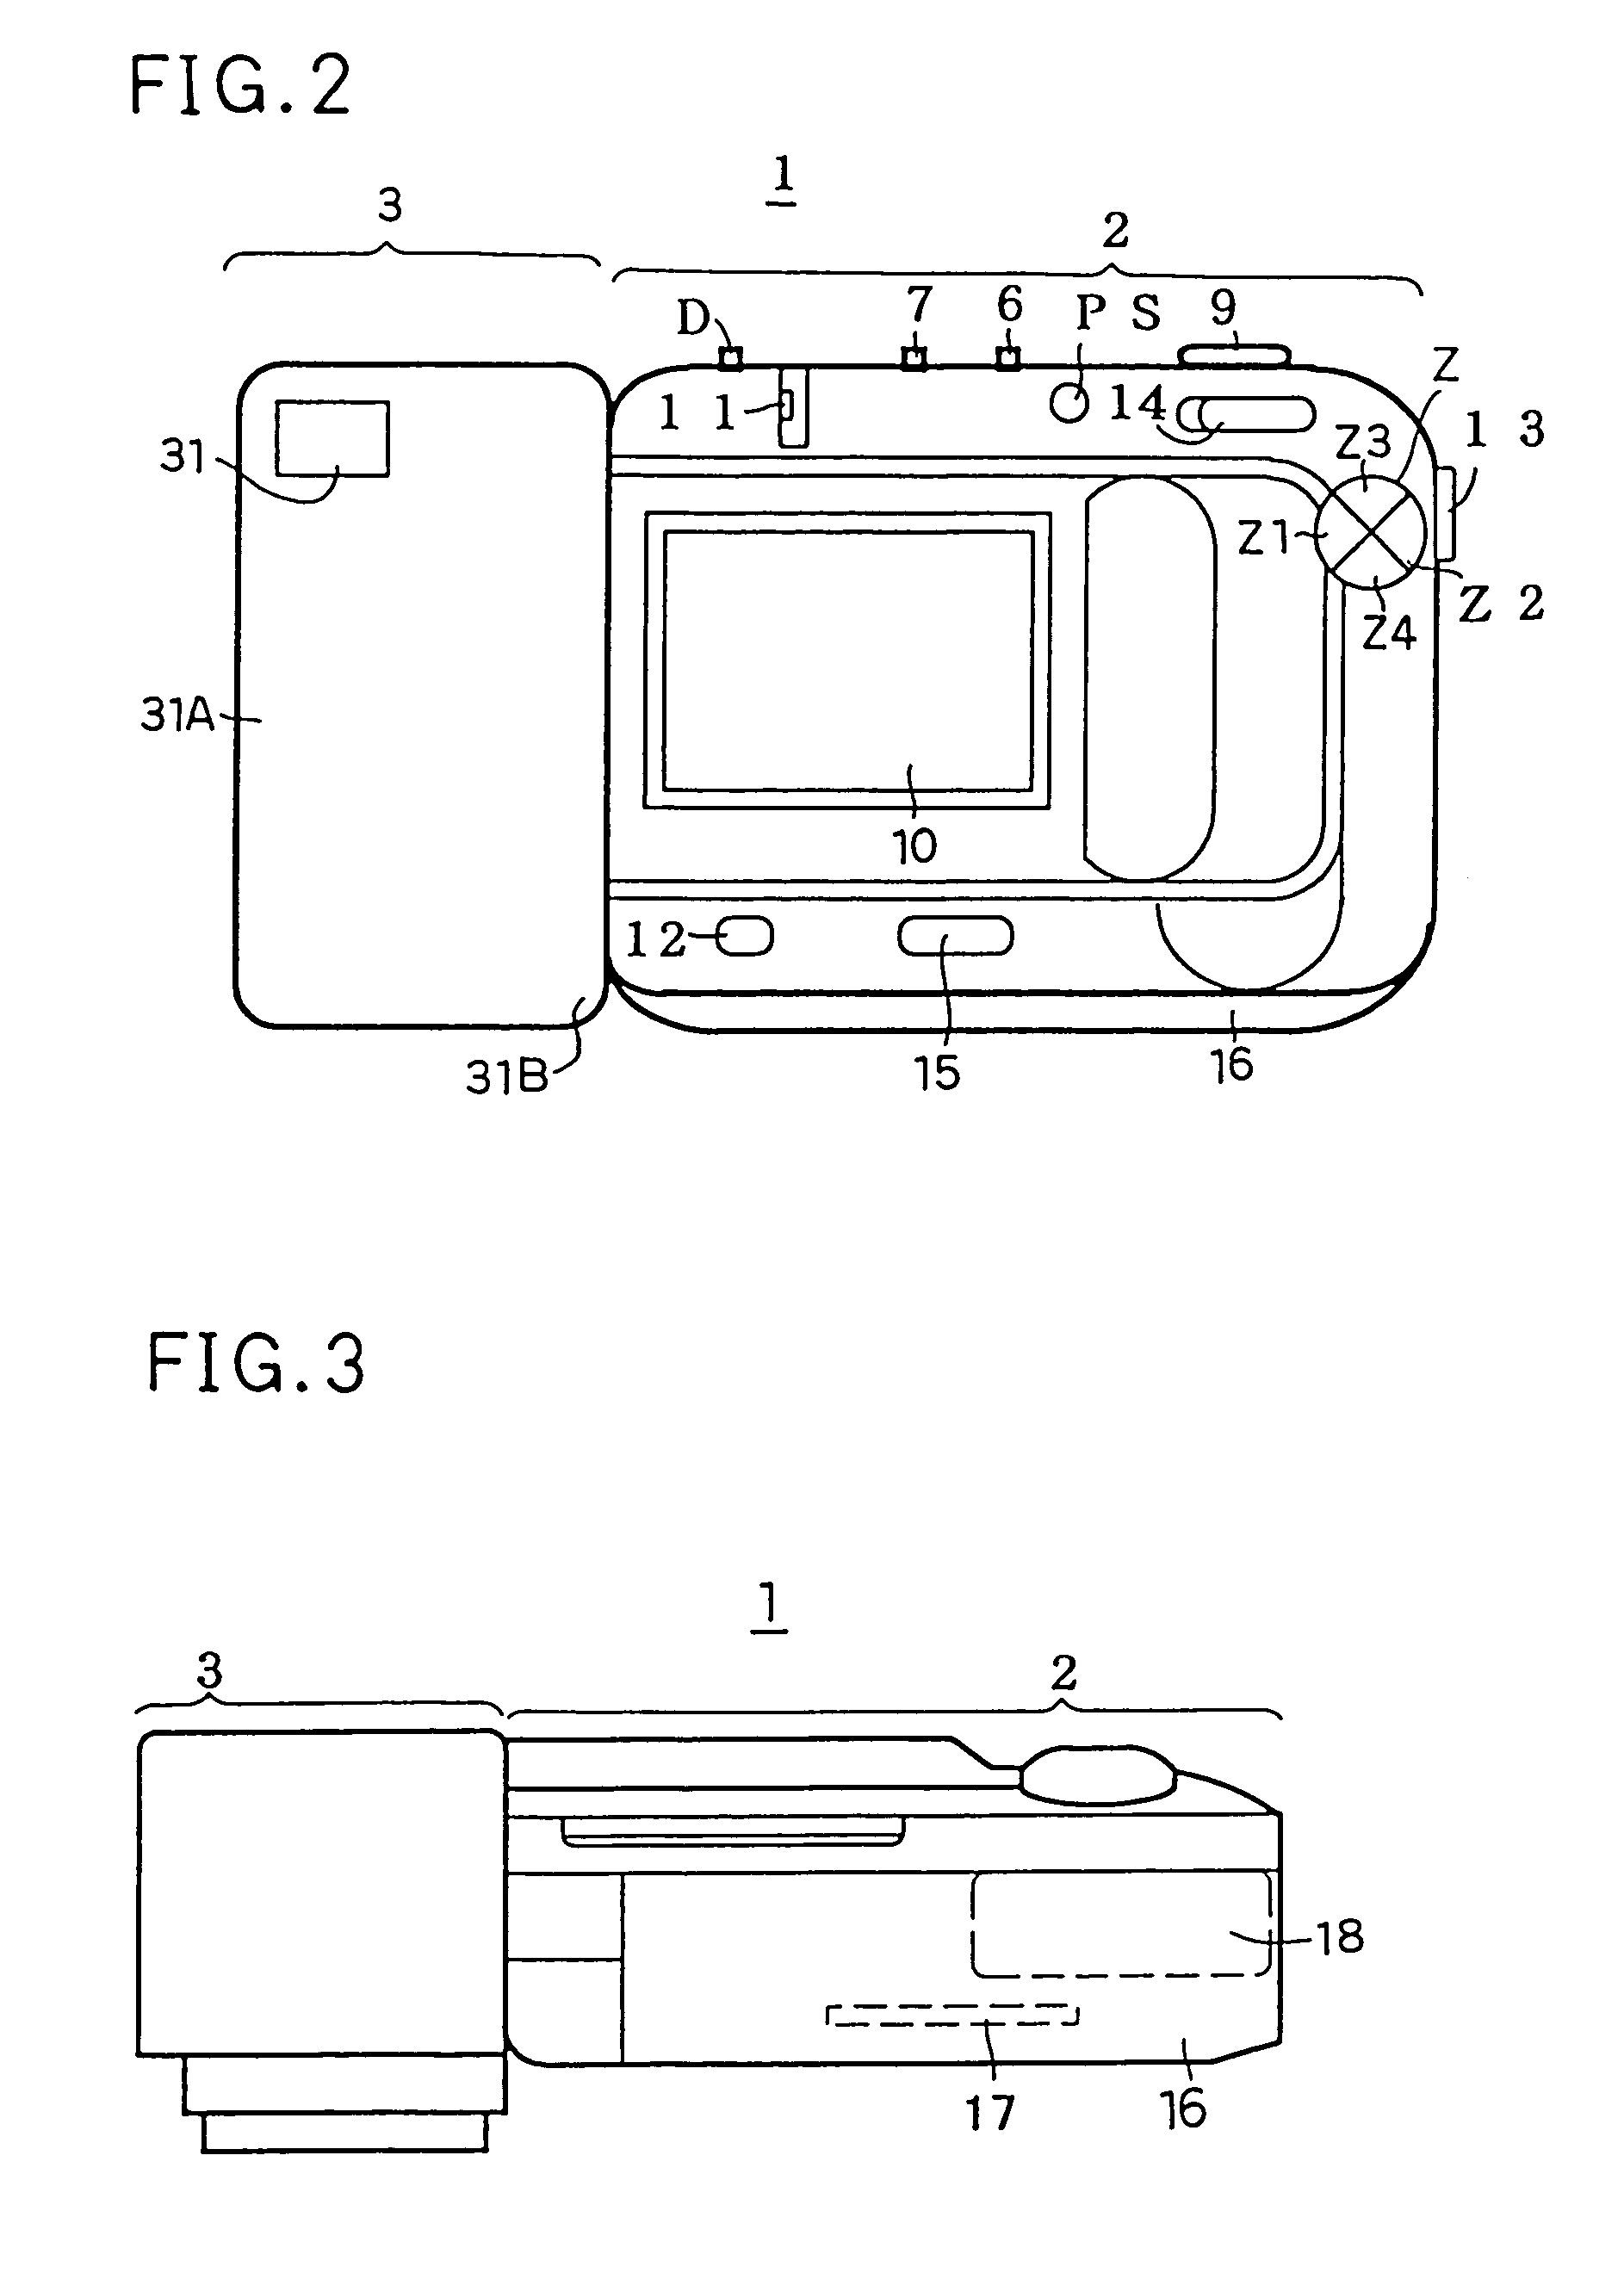 Digital camera having controller for reducing occurrences of blur in displayed images